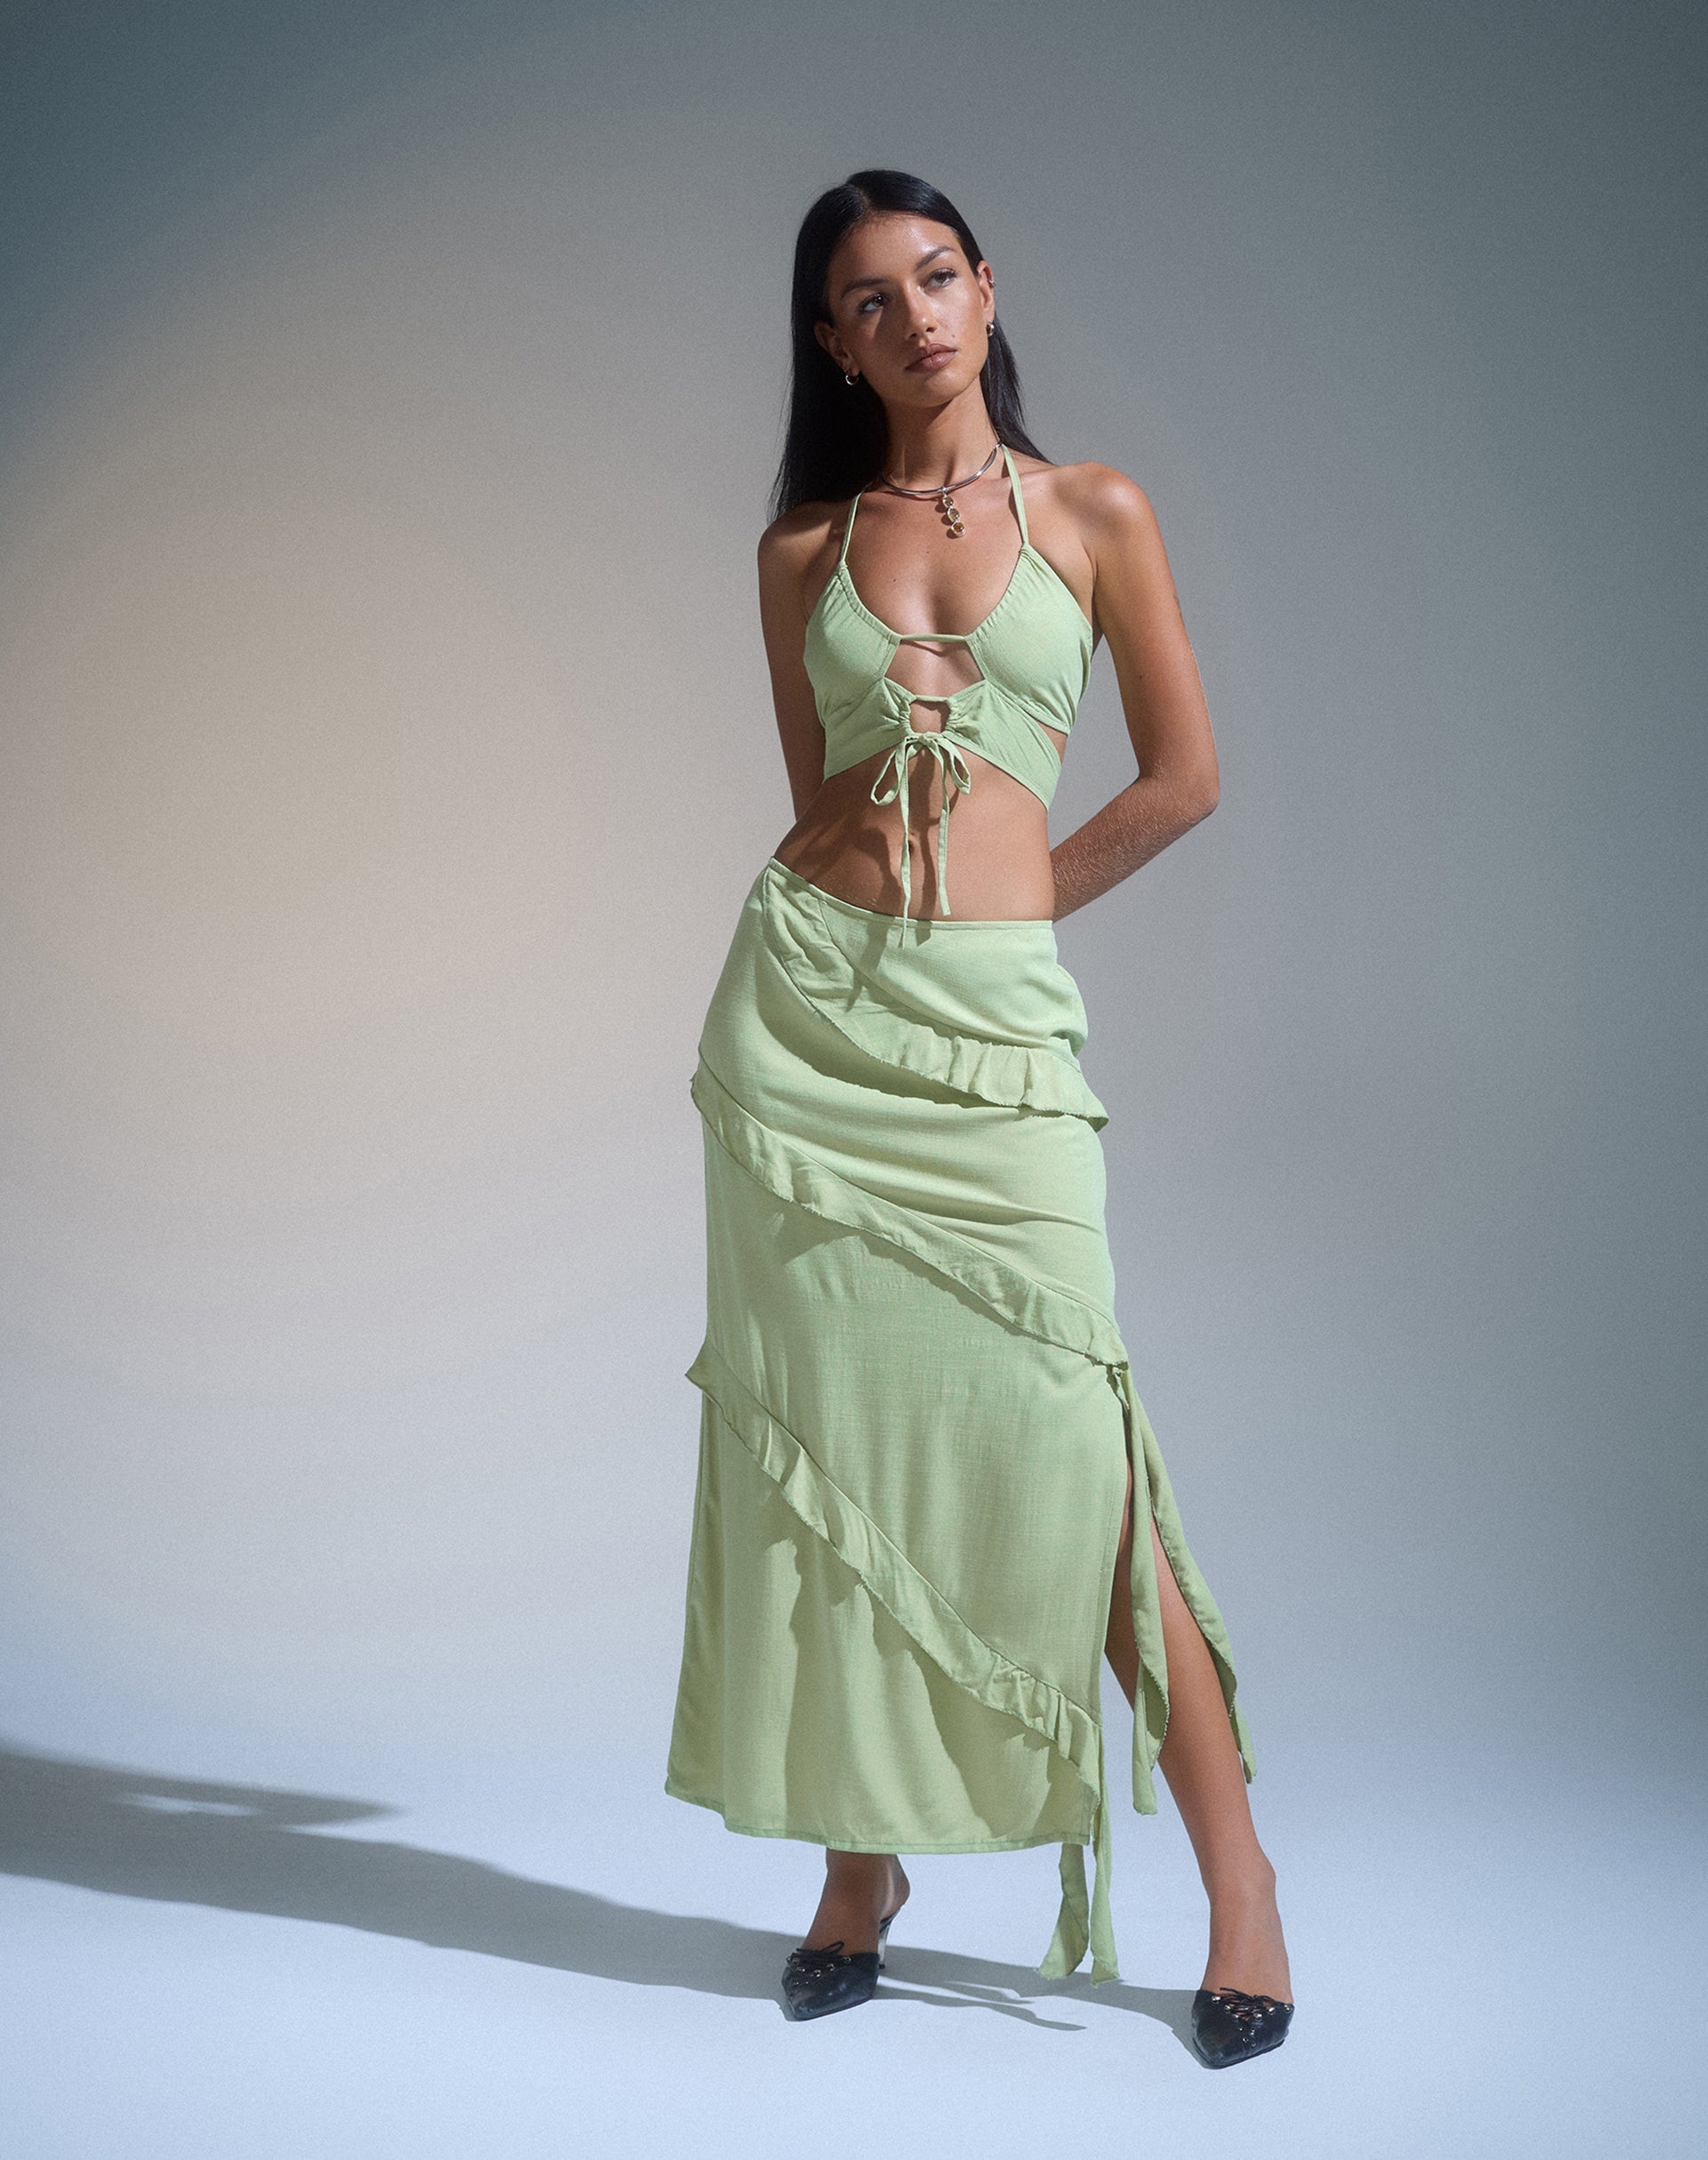 Image of Varena Low Rise Ruffle Maxi Skirt in Mint Sage